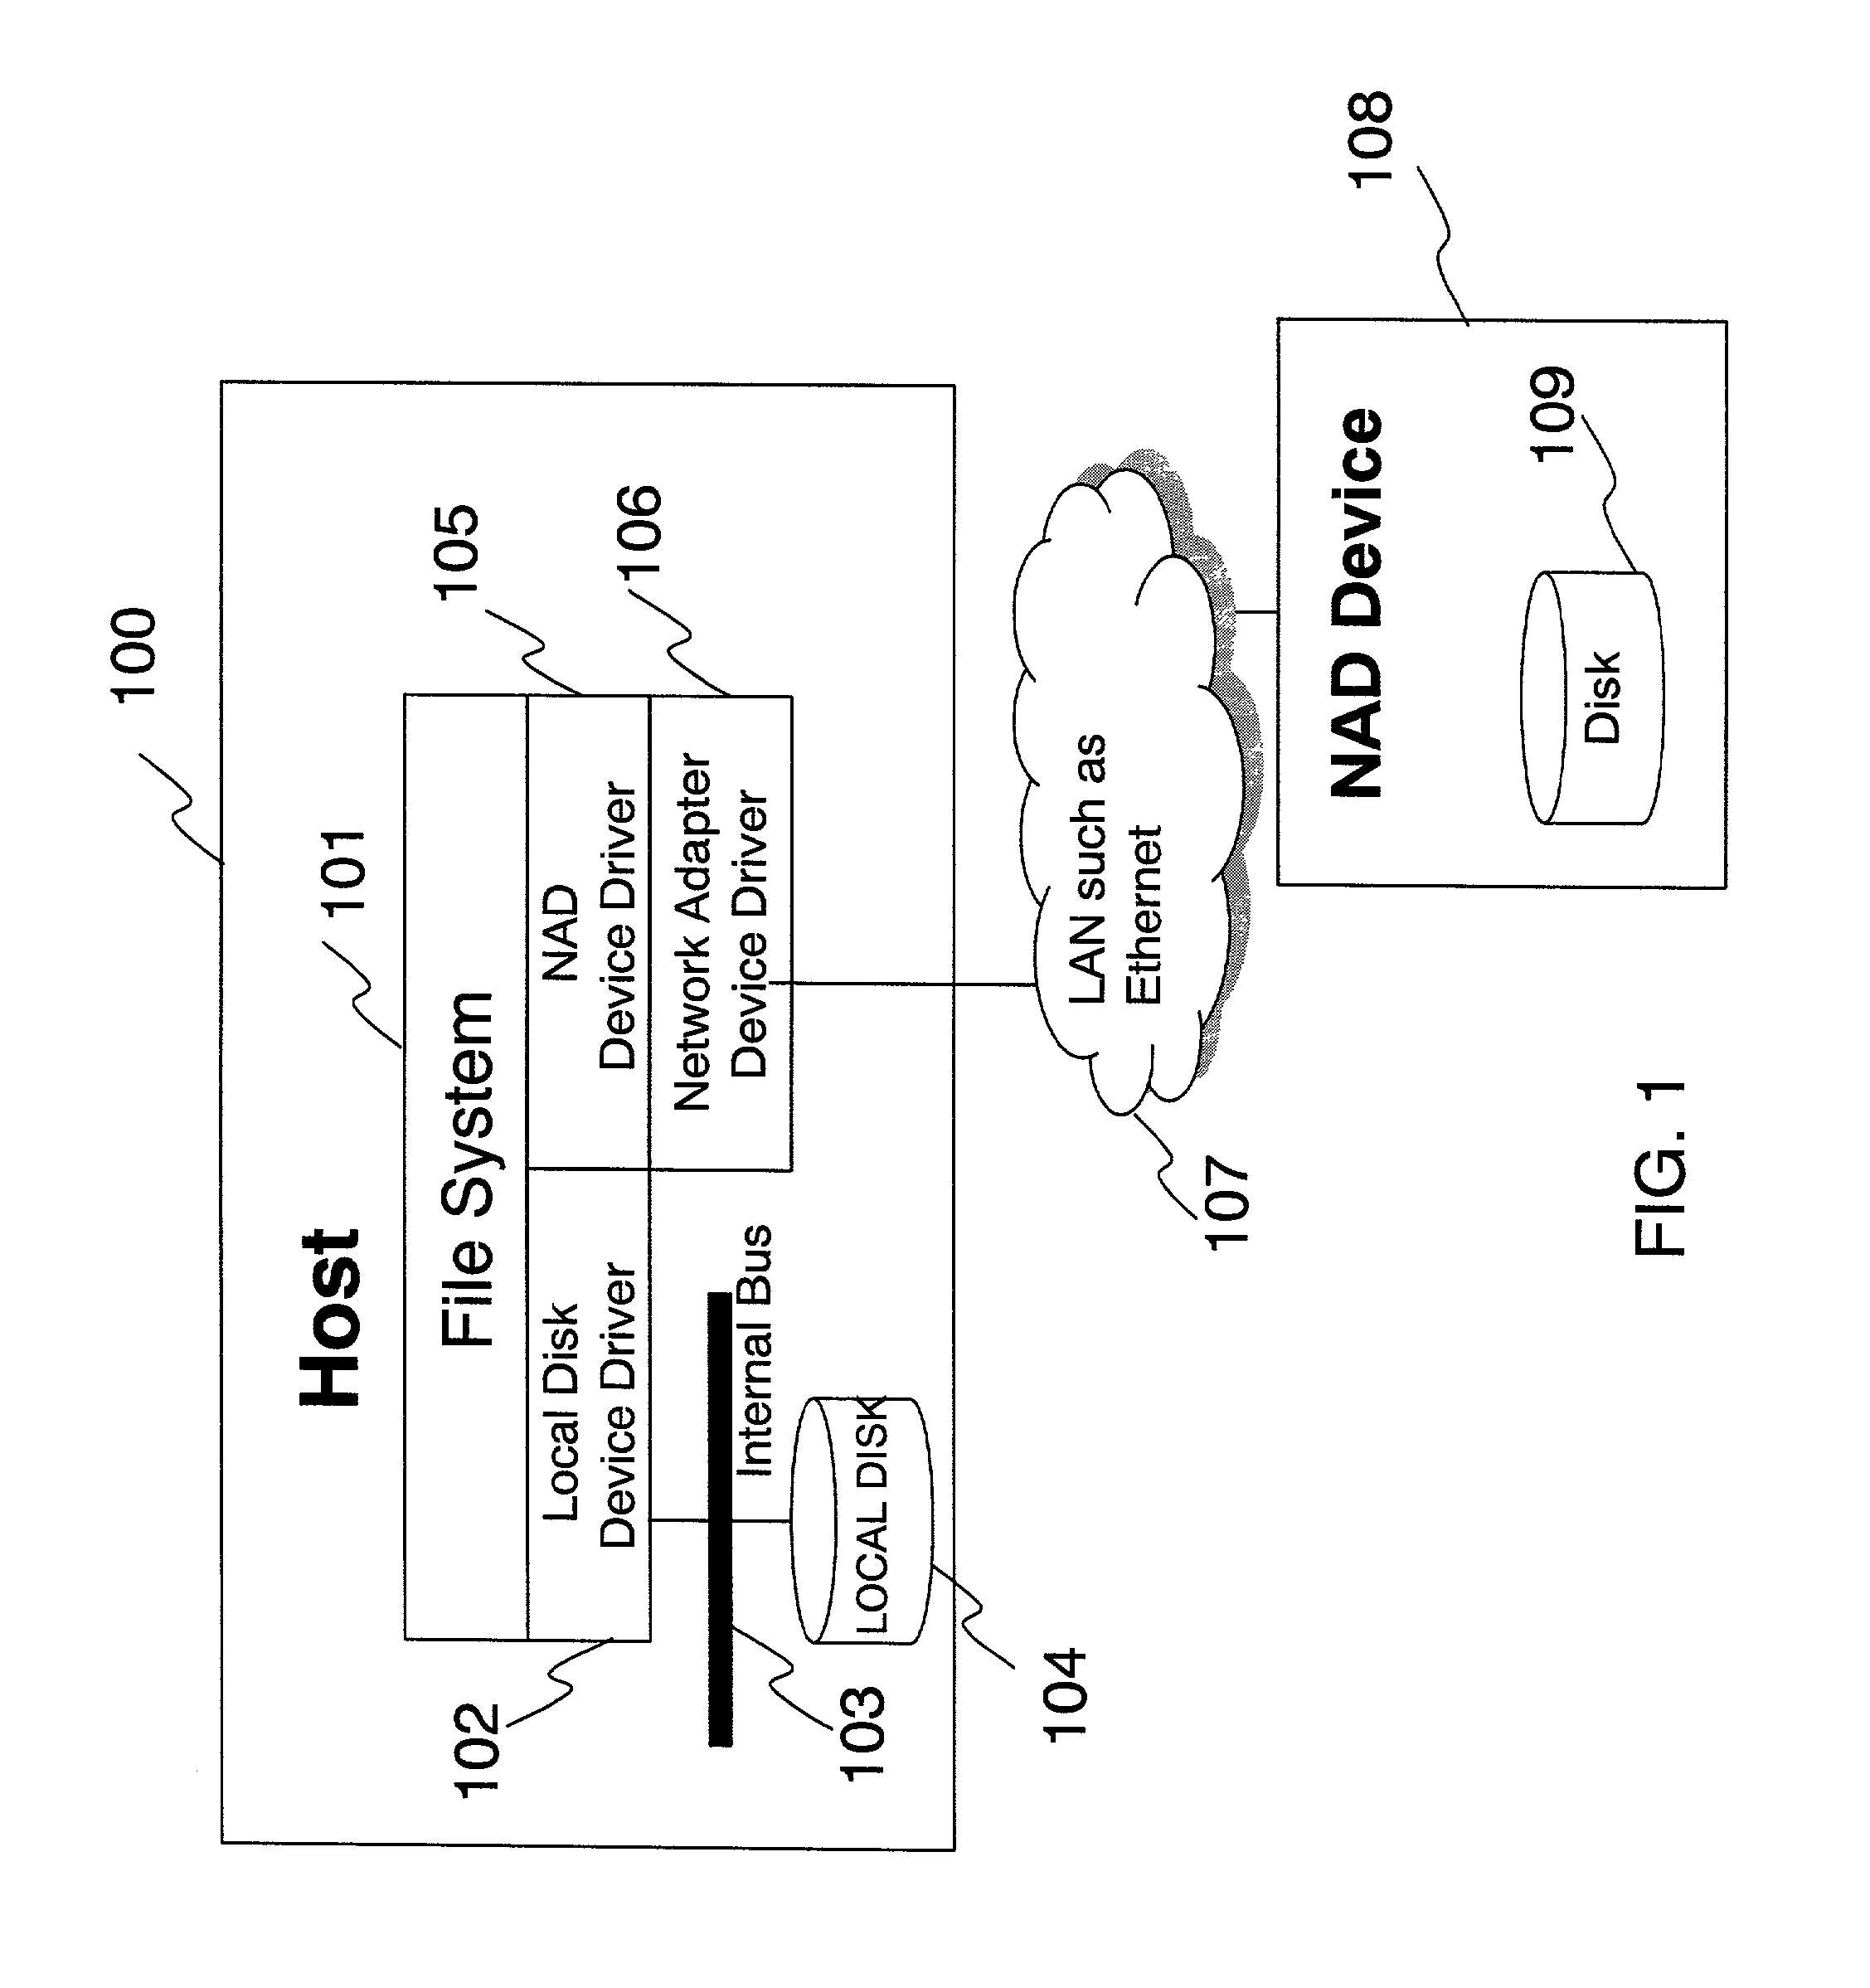 Disk system adapted to be directly attached to network